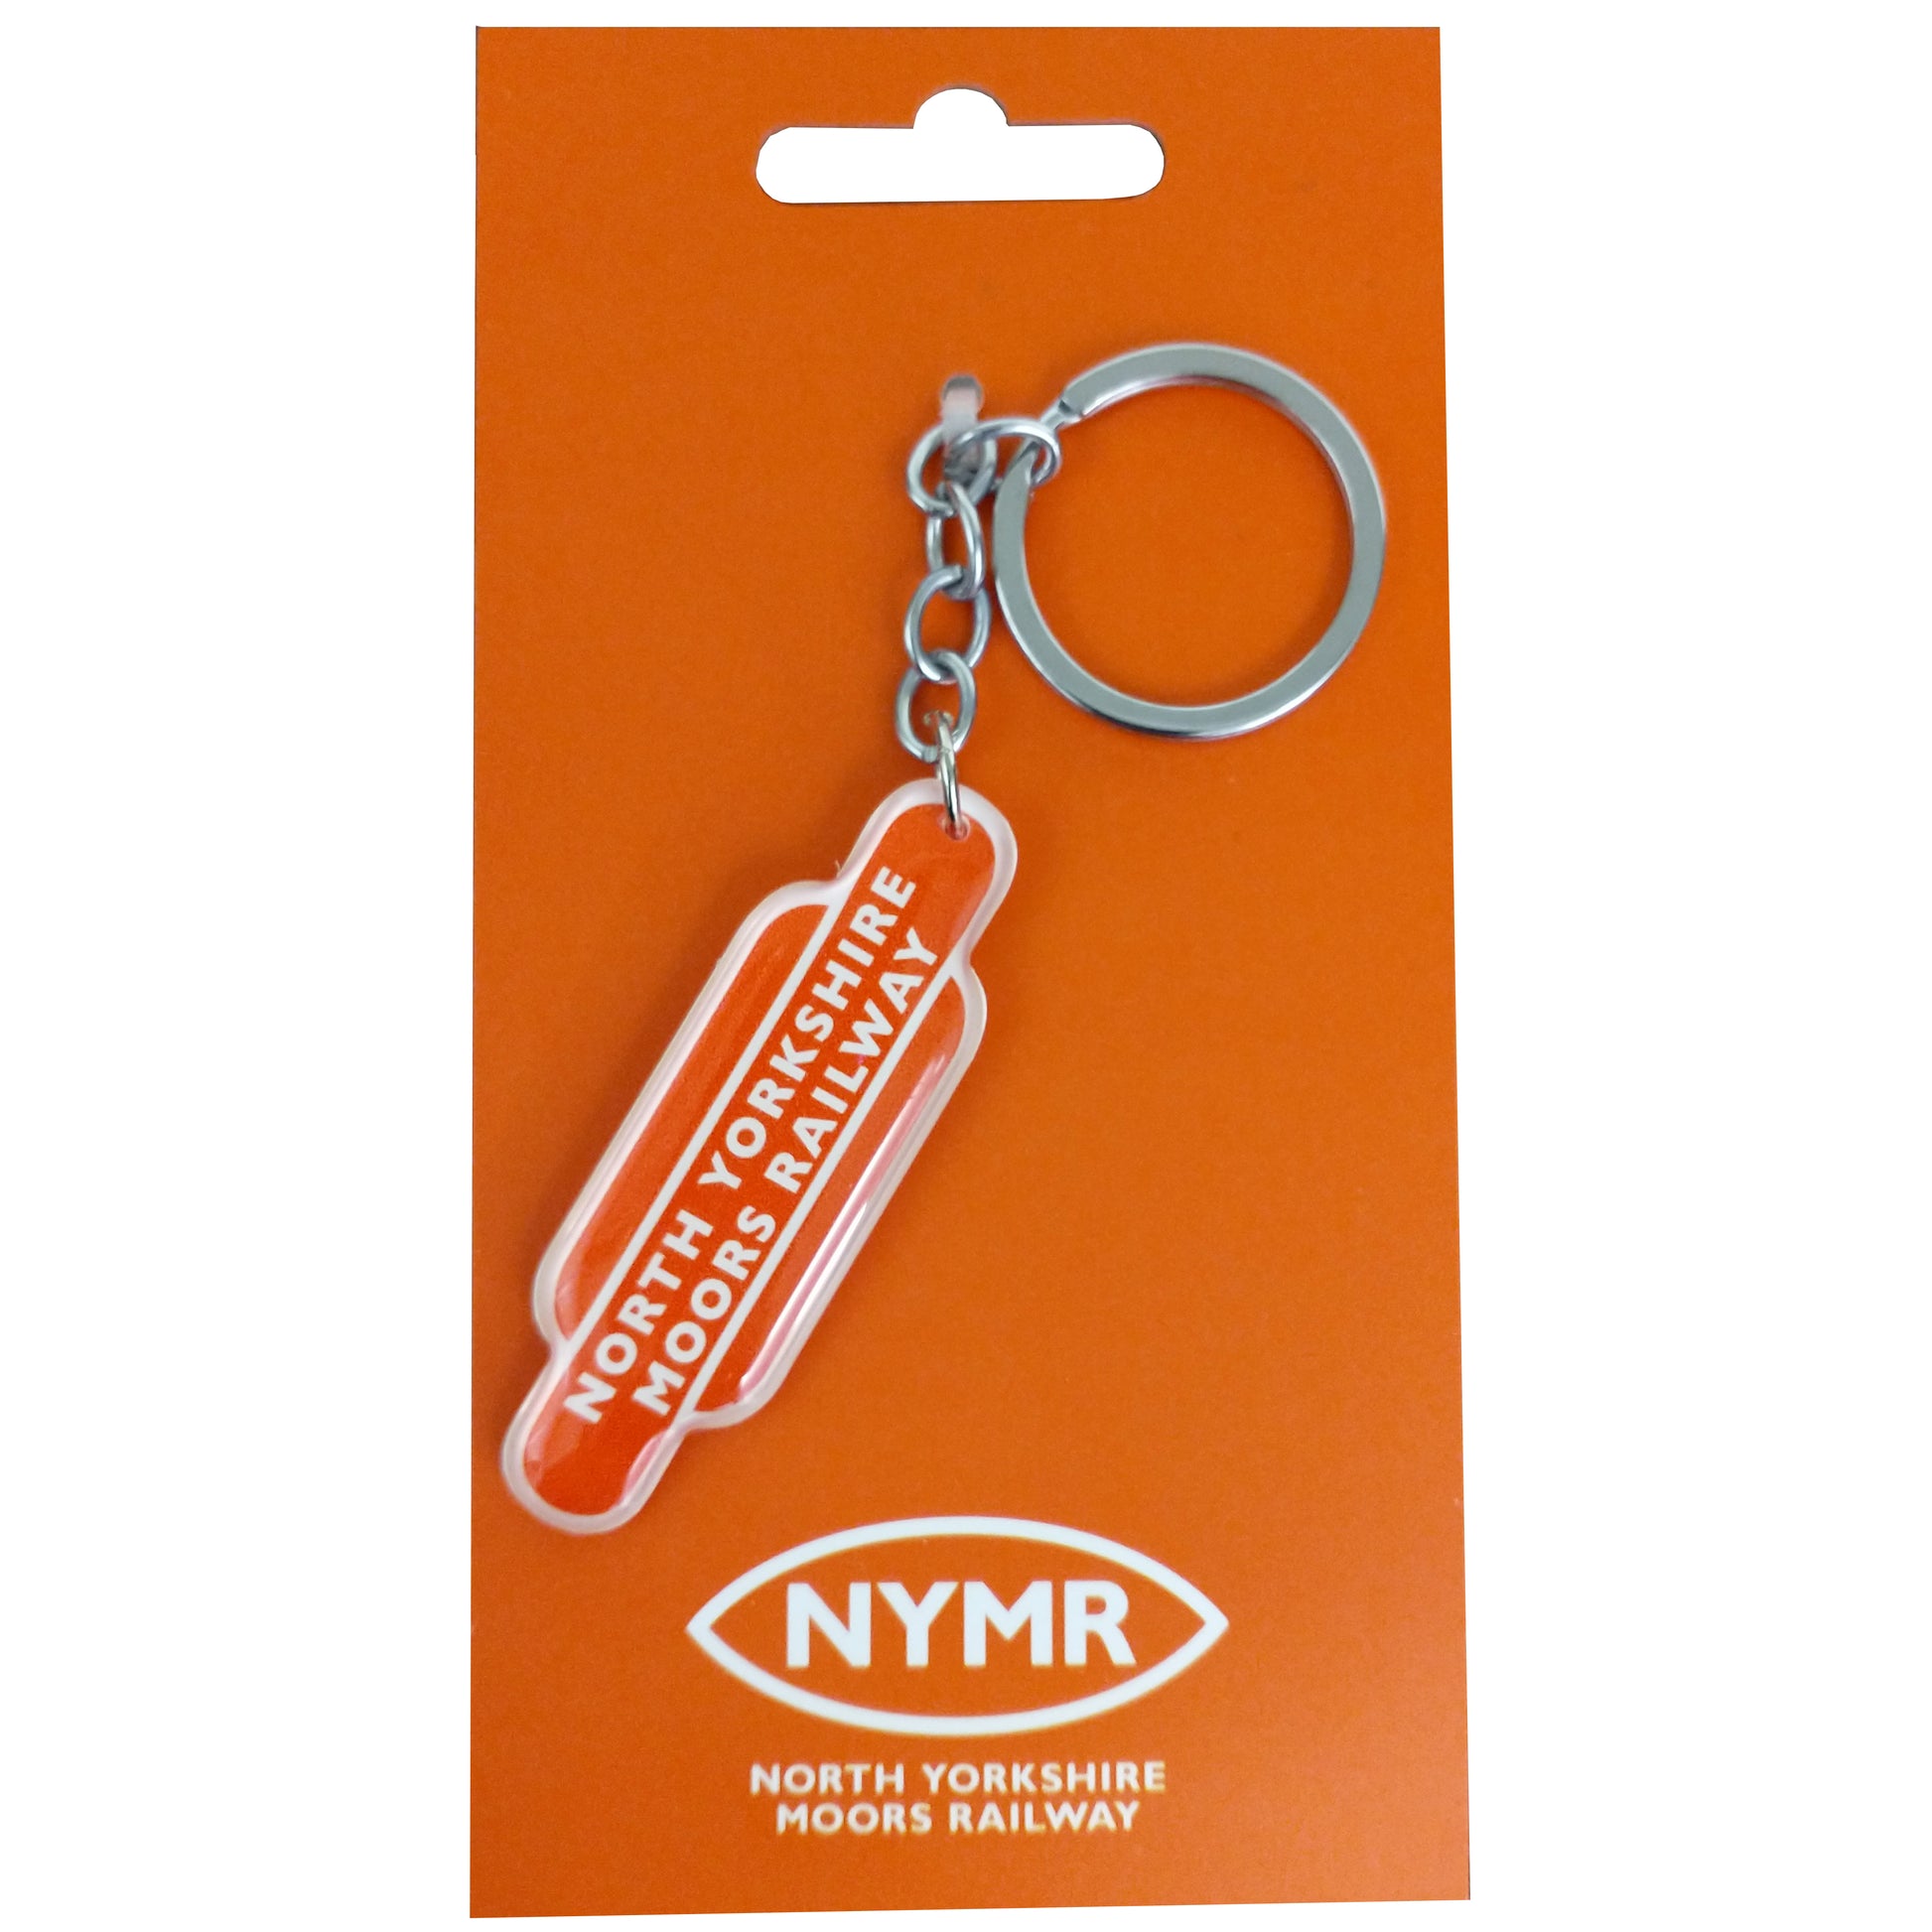 An orange totem shaped keyring with NORTH YORKSHIRE MOORS RAILWAY printed on it. Attached to an orange backing board for display.